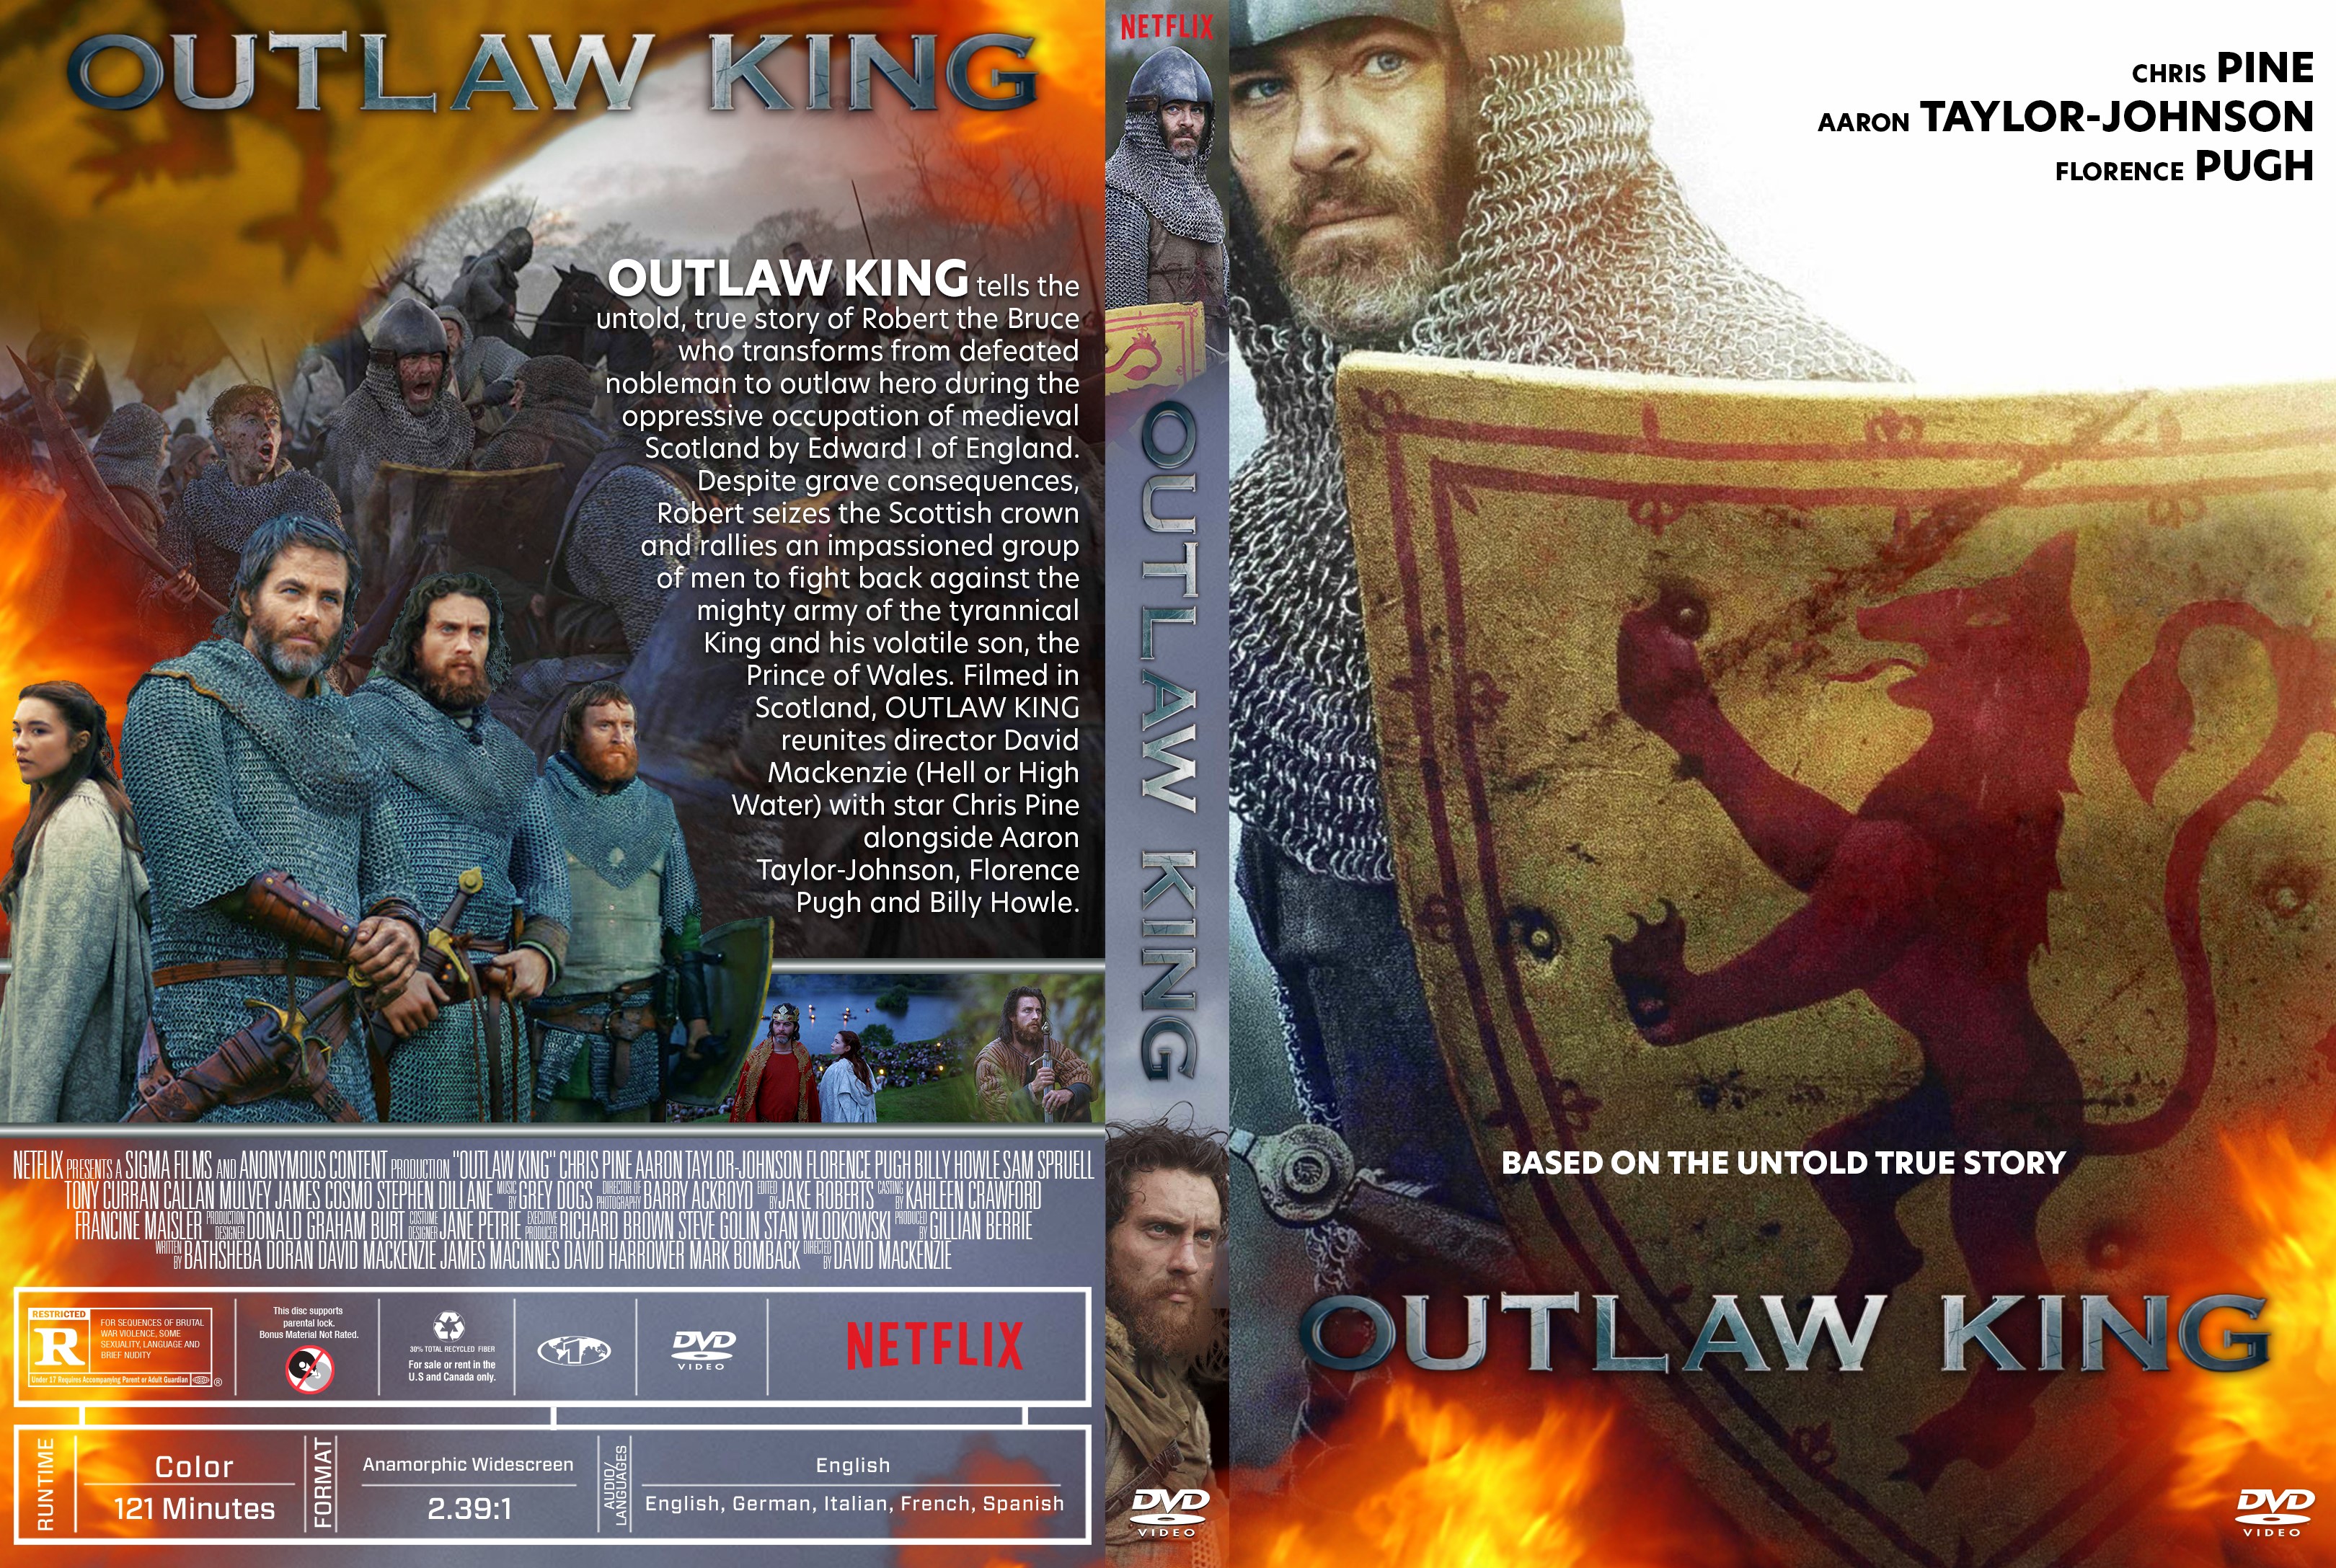 Outlaw King DVD Cover.